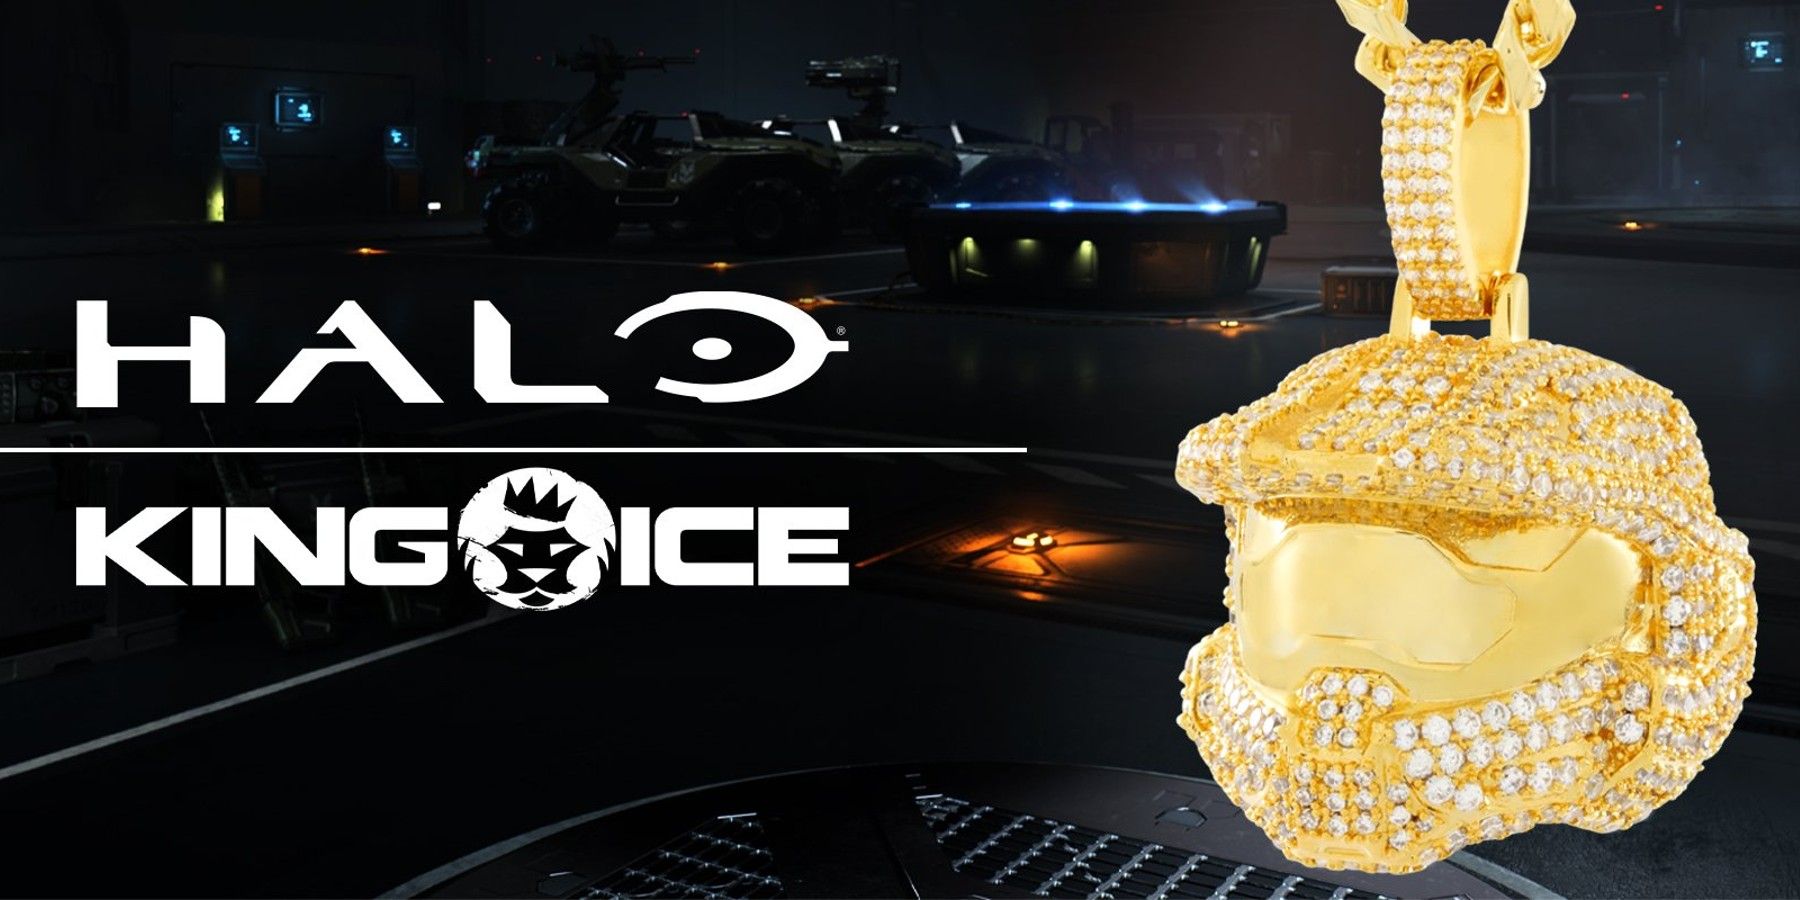 Gold Halo Necklaces Unveiled by King Ice